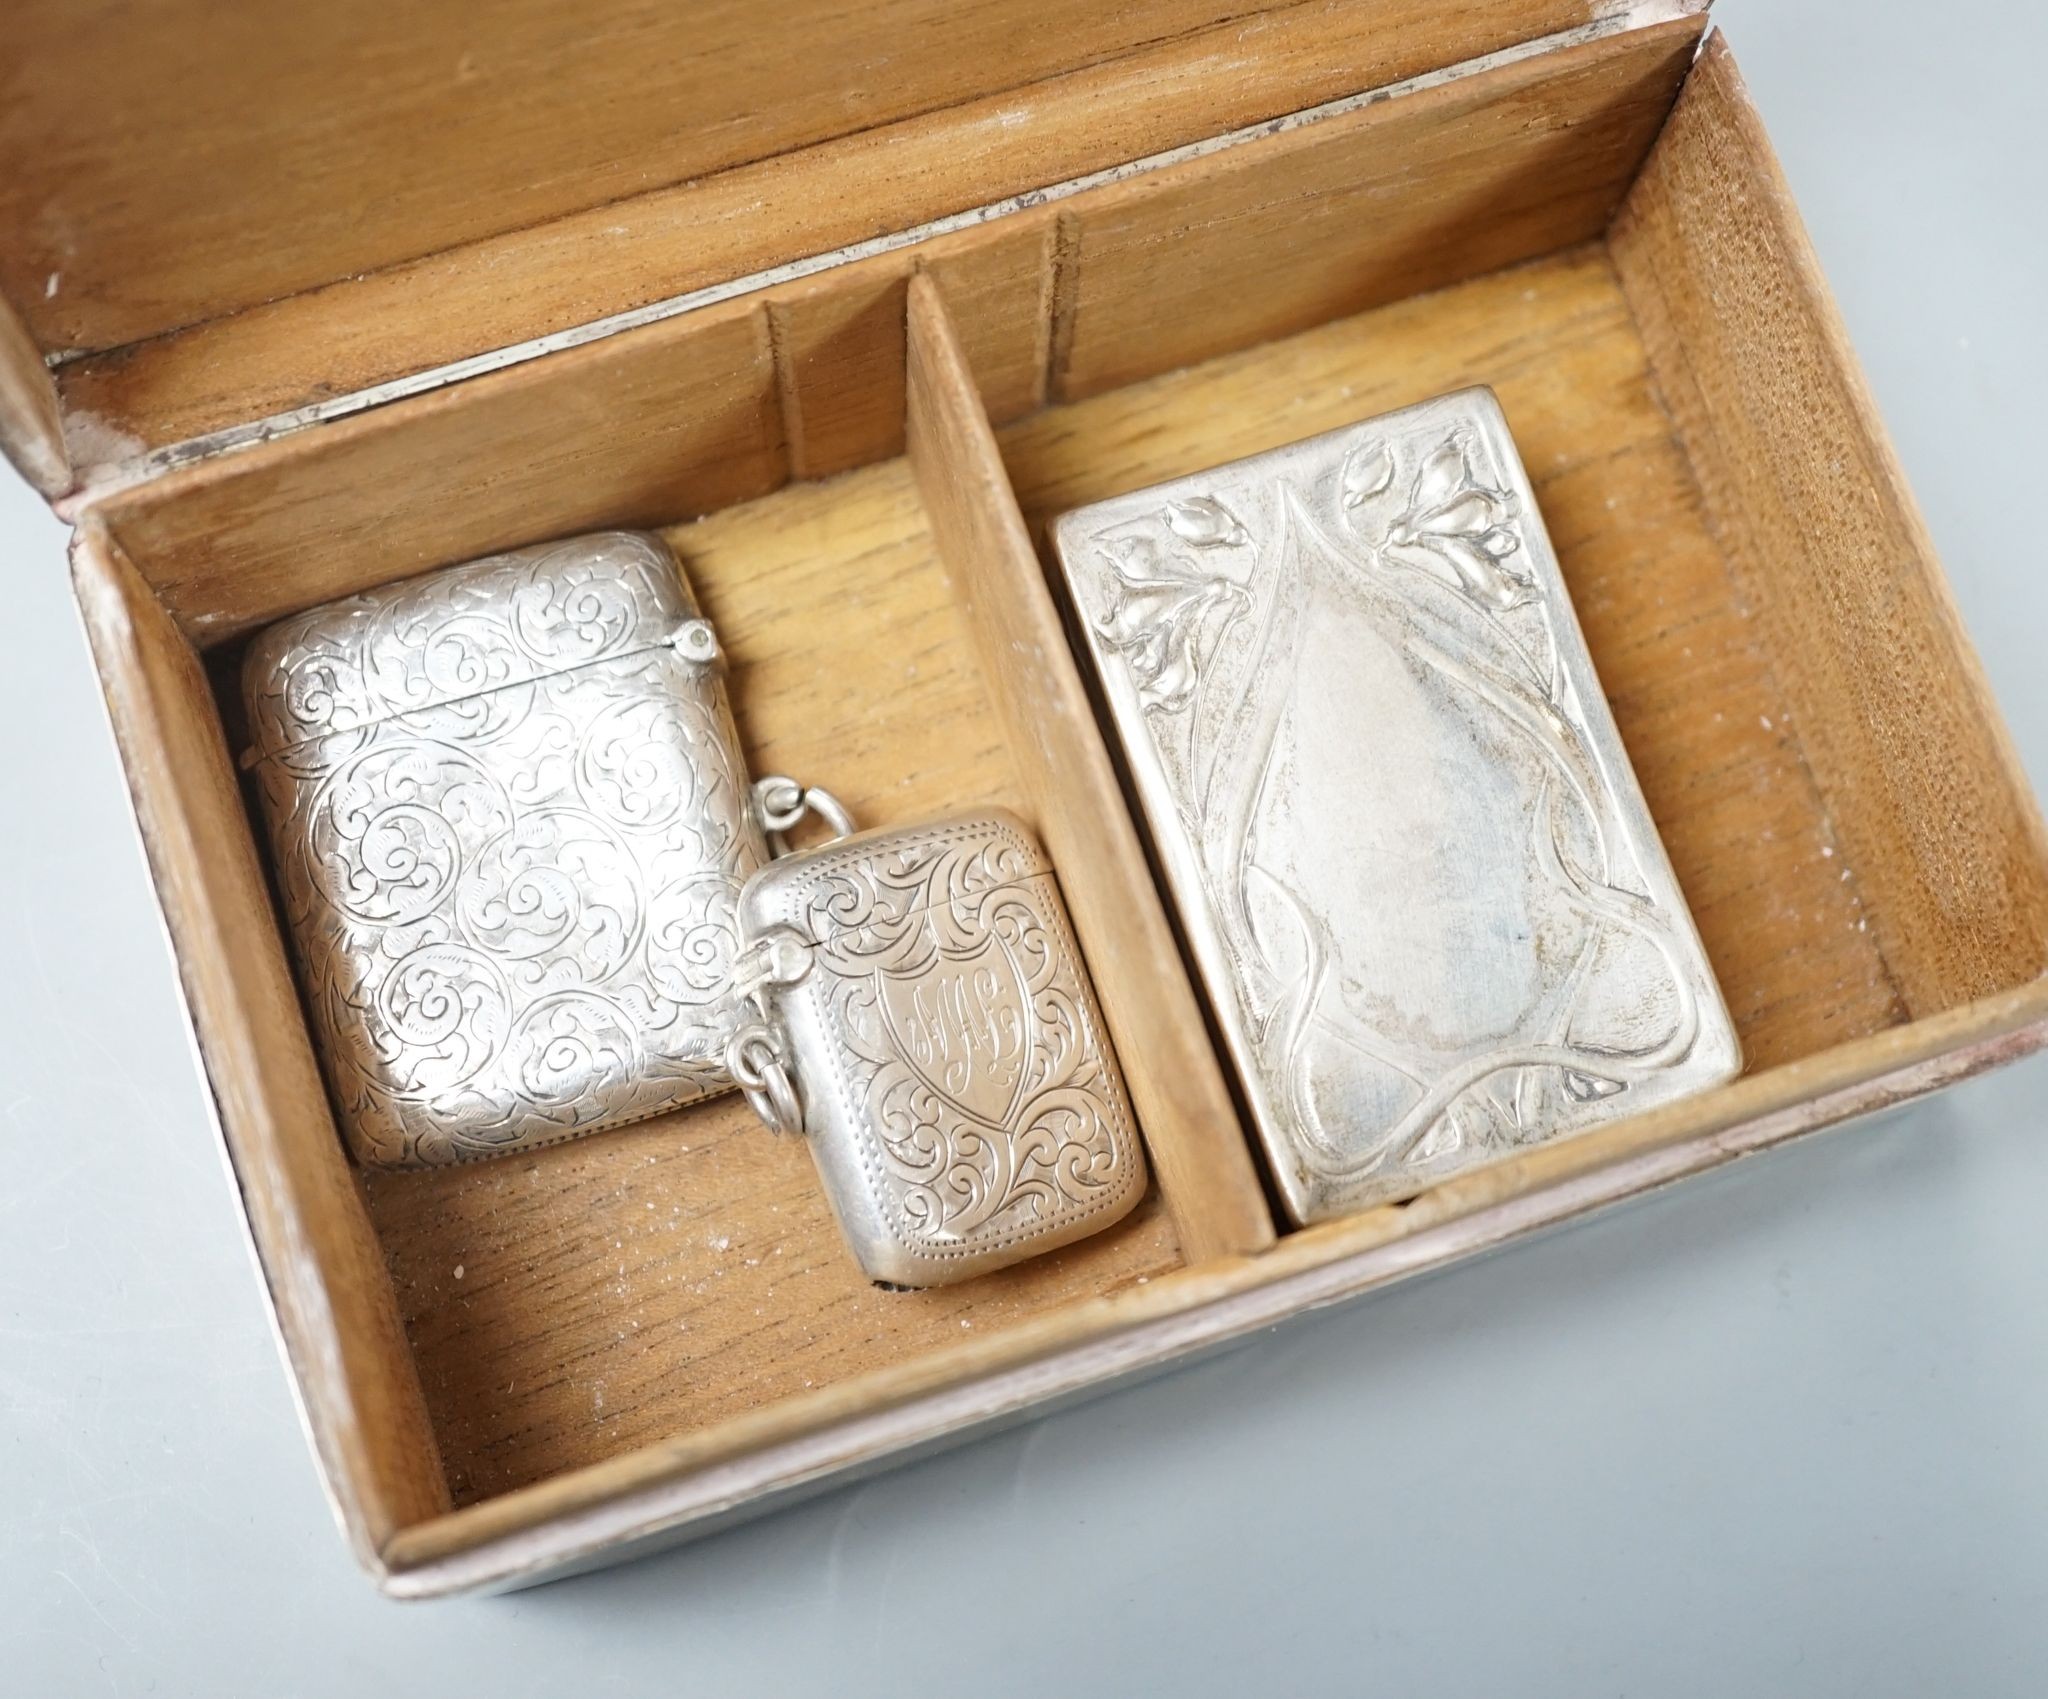 A silver mounted cigarette box, two silver vestas and a silver matchbox sleeve.